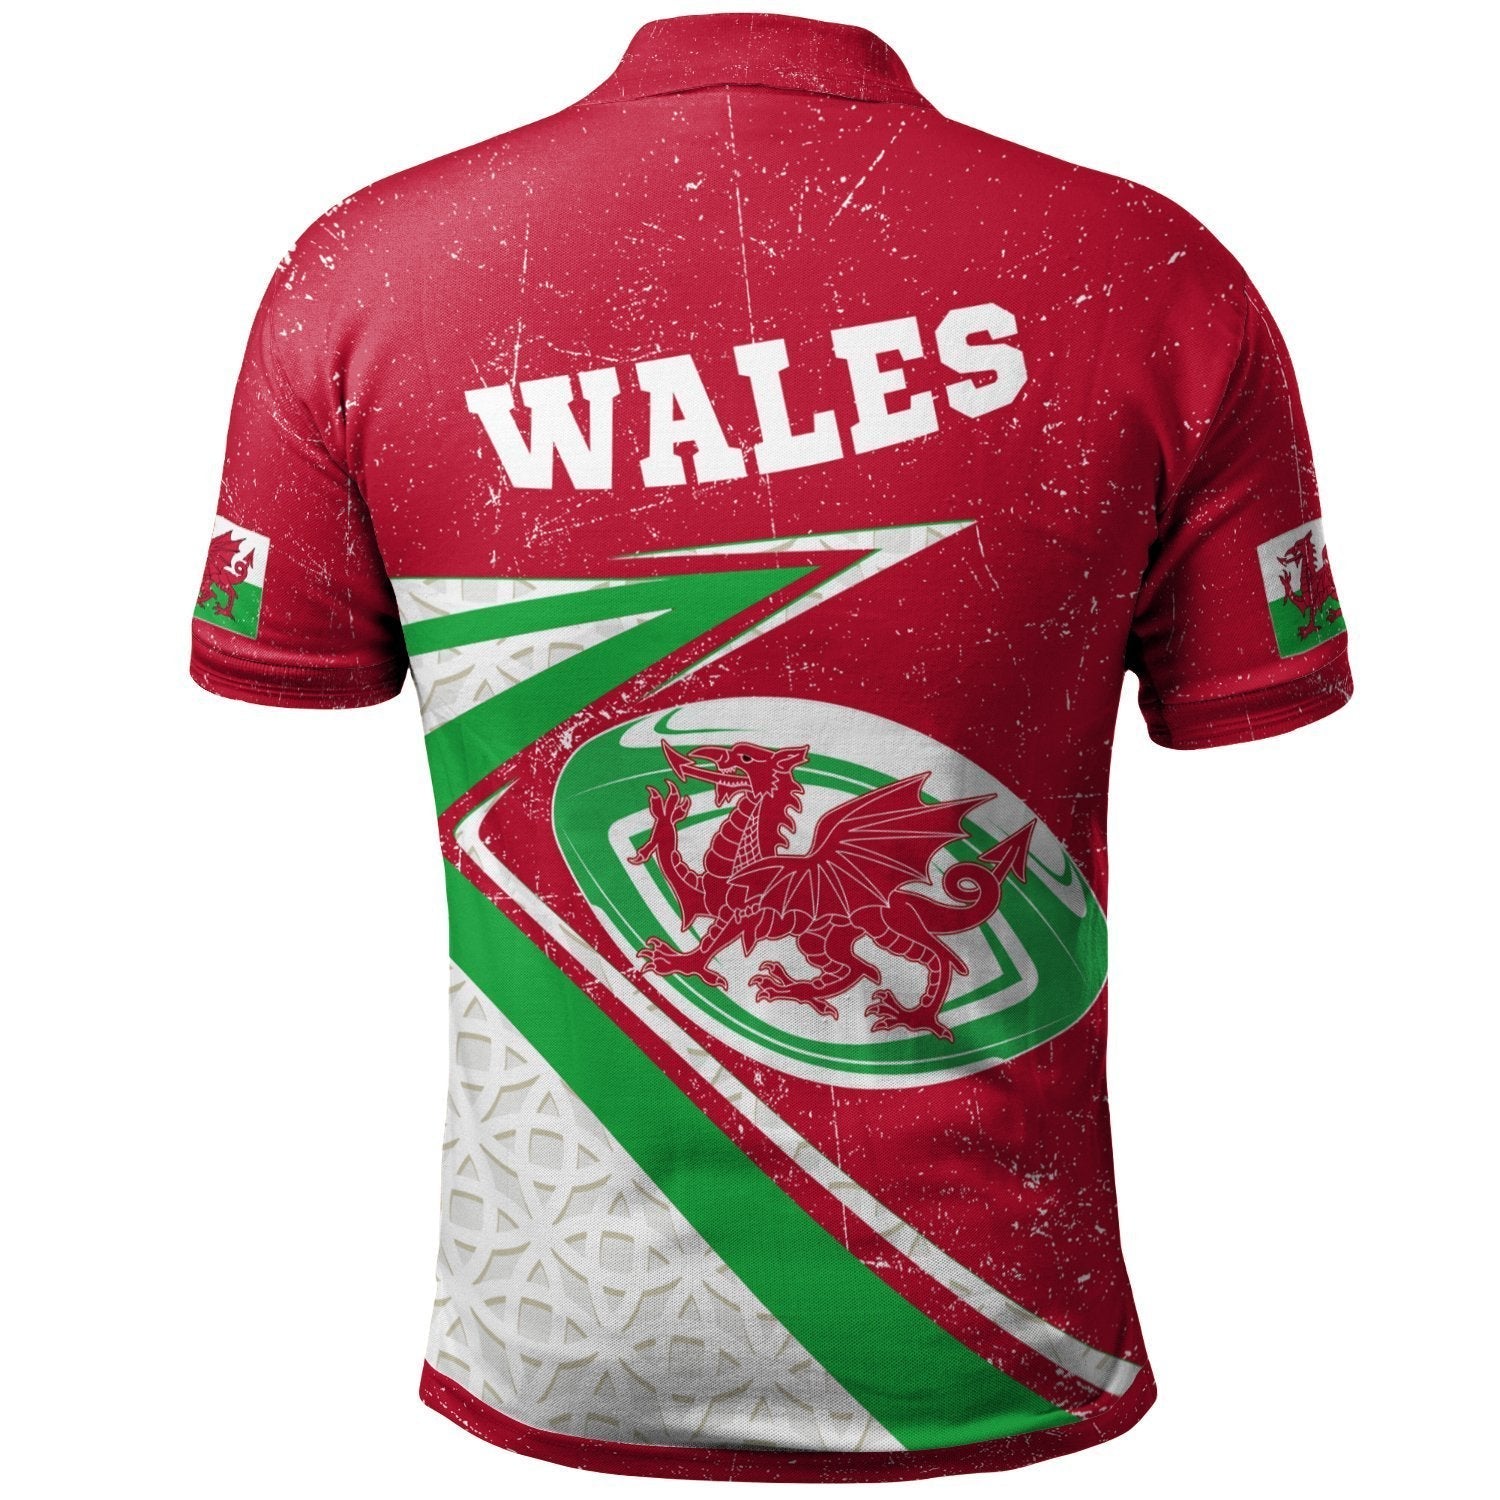 wales-rugby-polo-shirt-celtic-welsh-rugby-ball